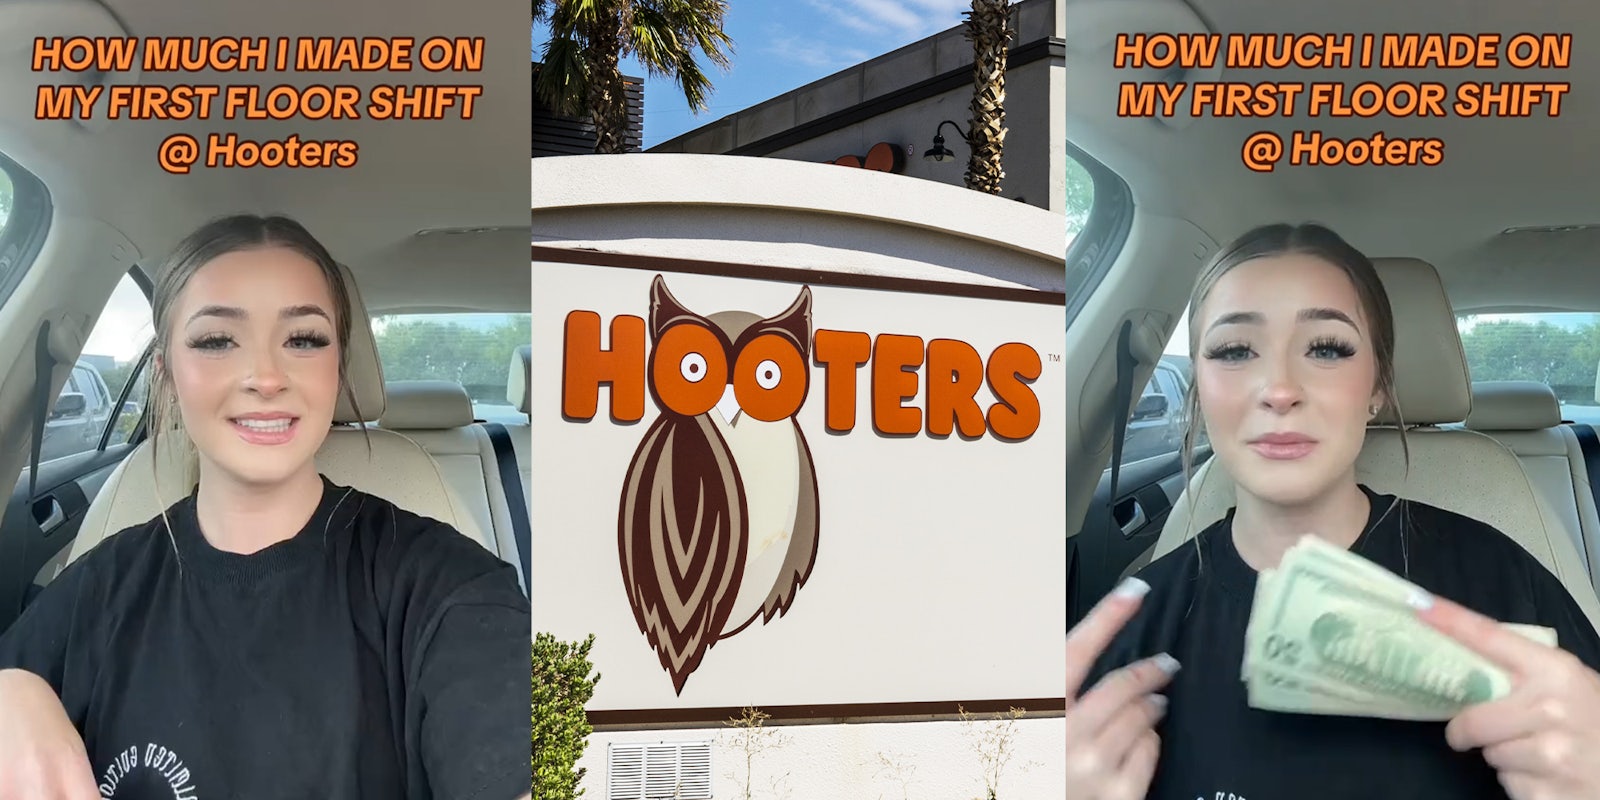 Hooters server shares how much she made in tips during her first shift